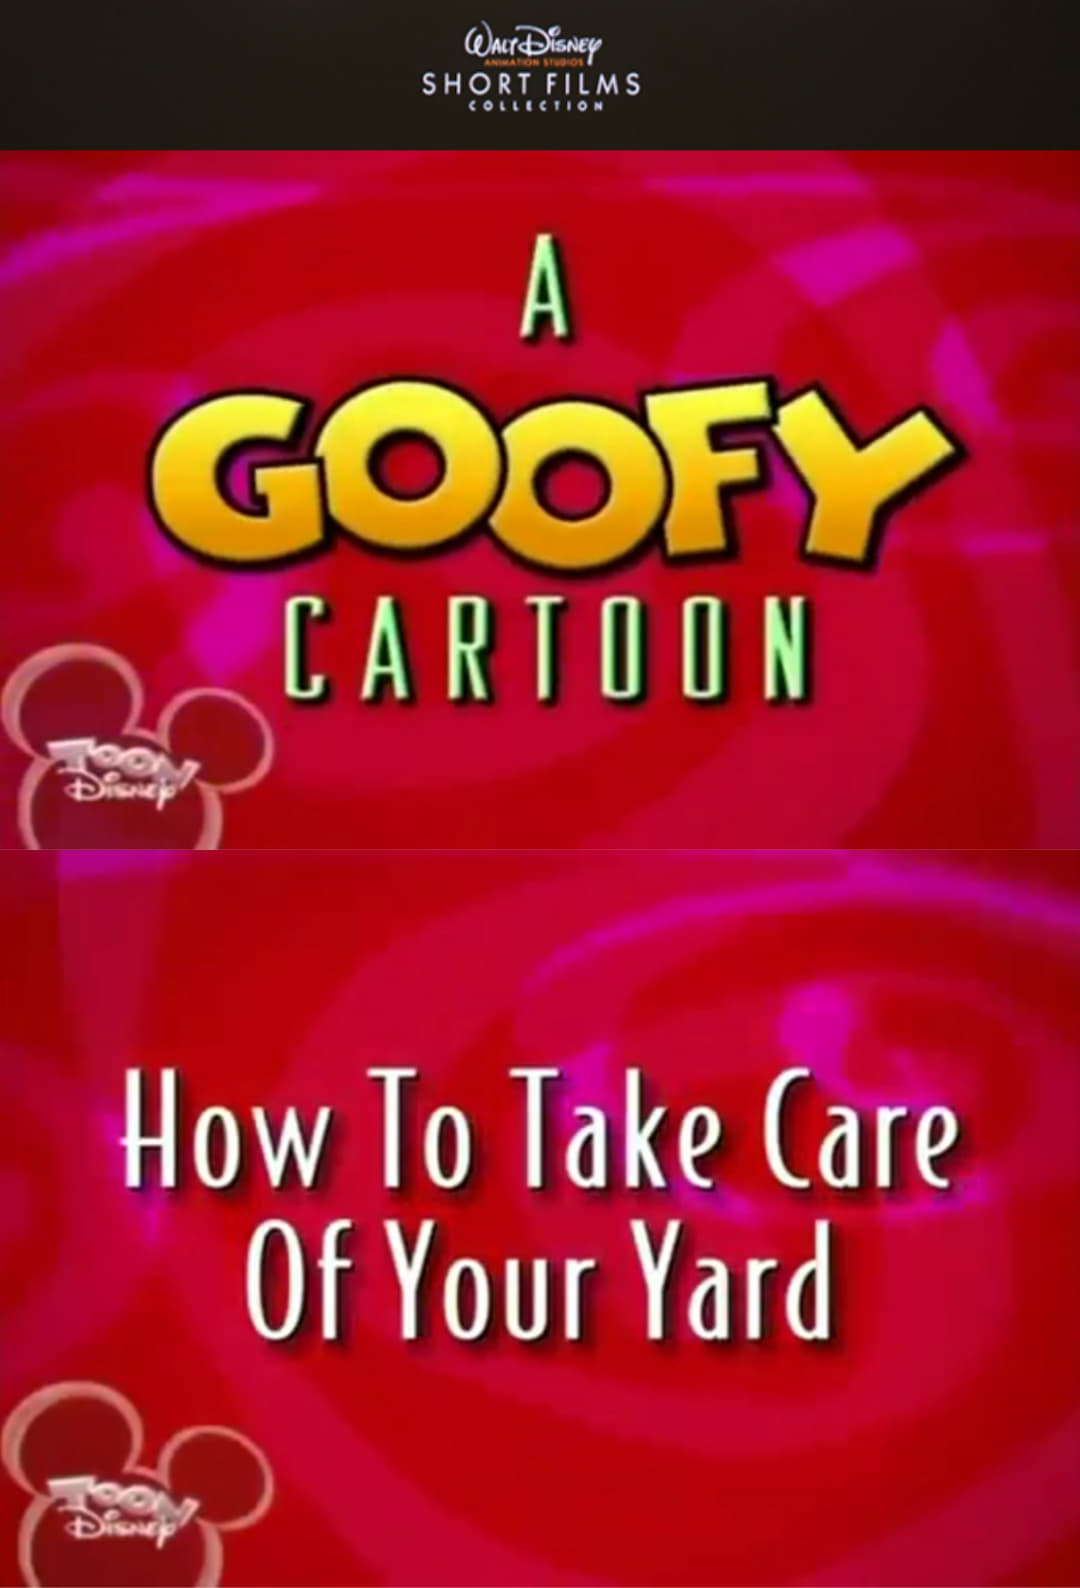 How to Take Care of Your Yard (2000)